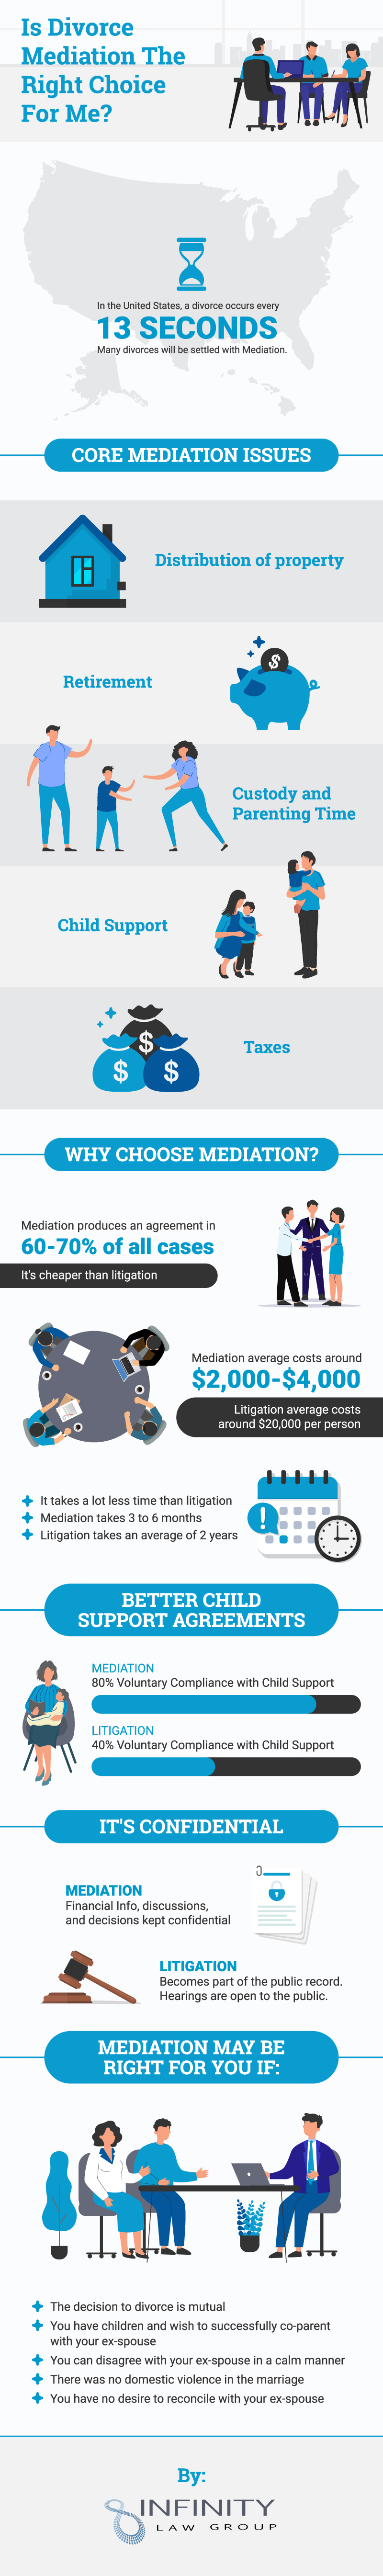 Is Divorce Mediation the Right Choice for Me?